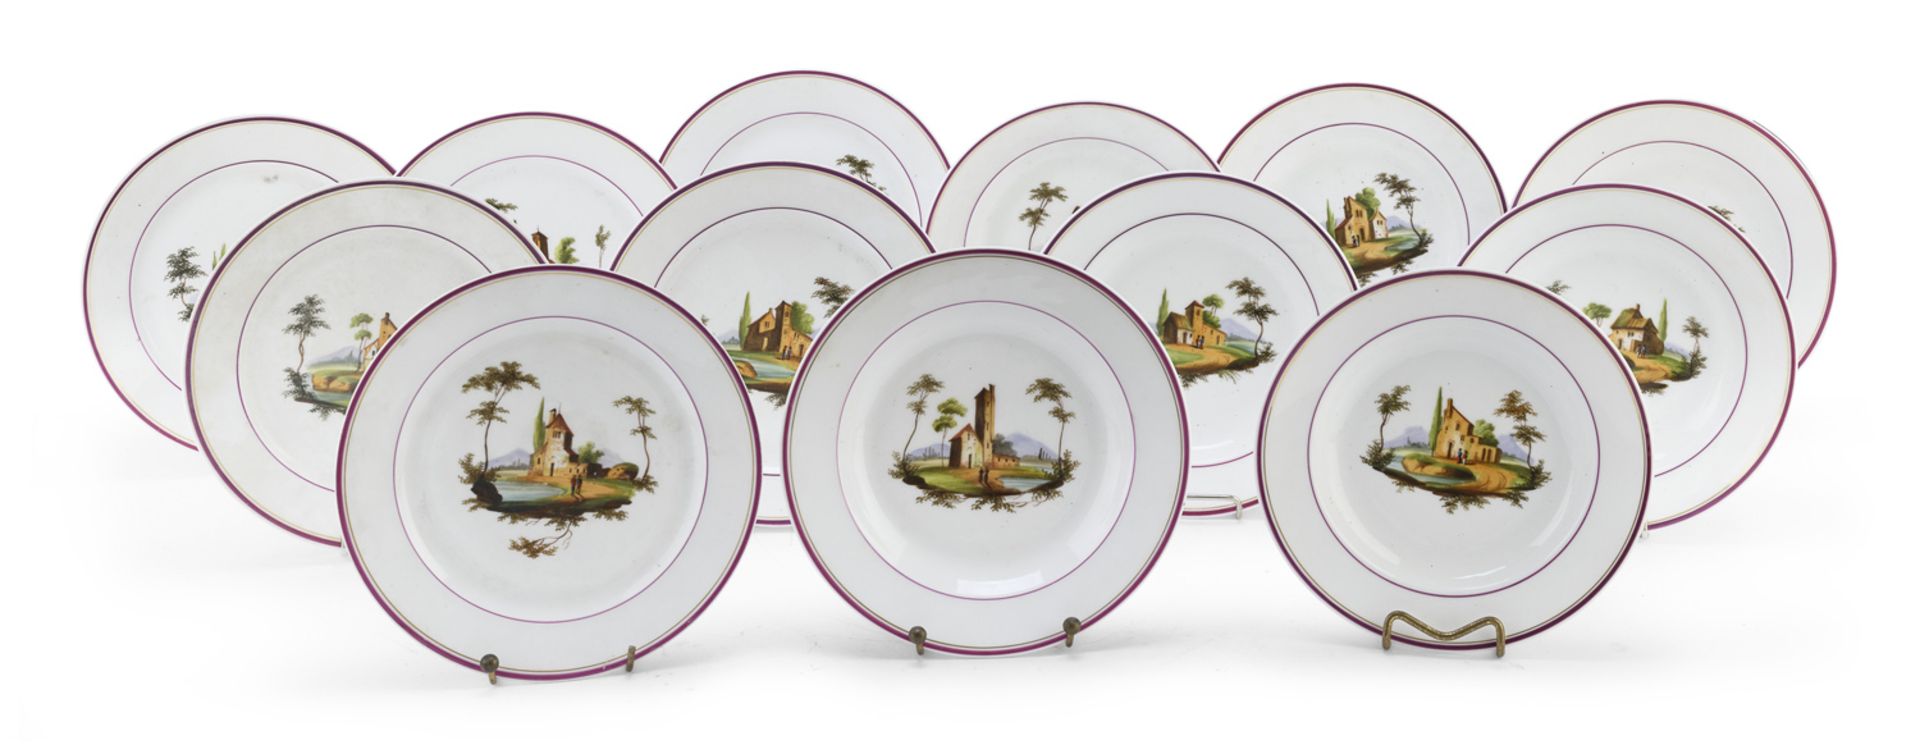 SET OF PORCELAIN DISHES CENTRAL ITALY 19th CENTURY